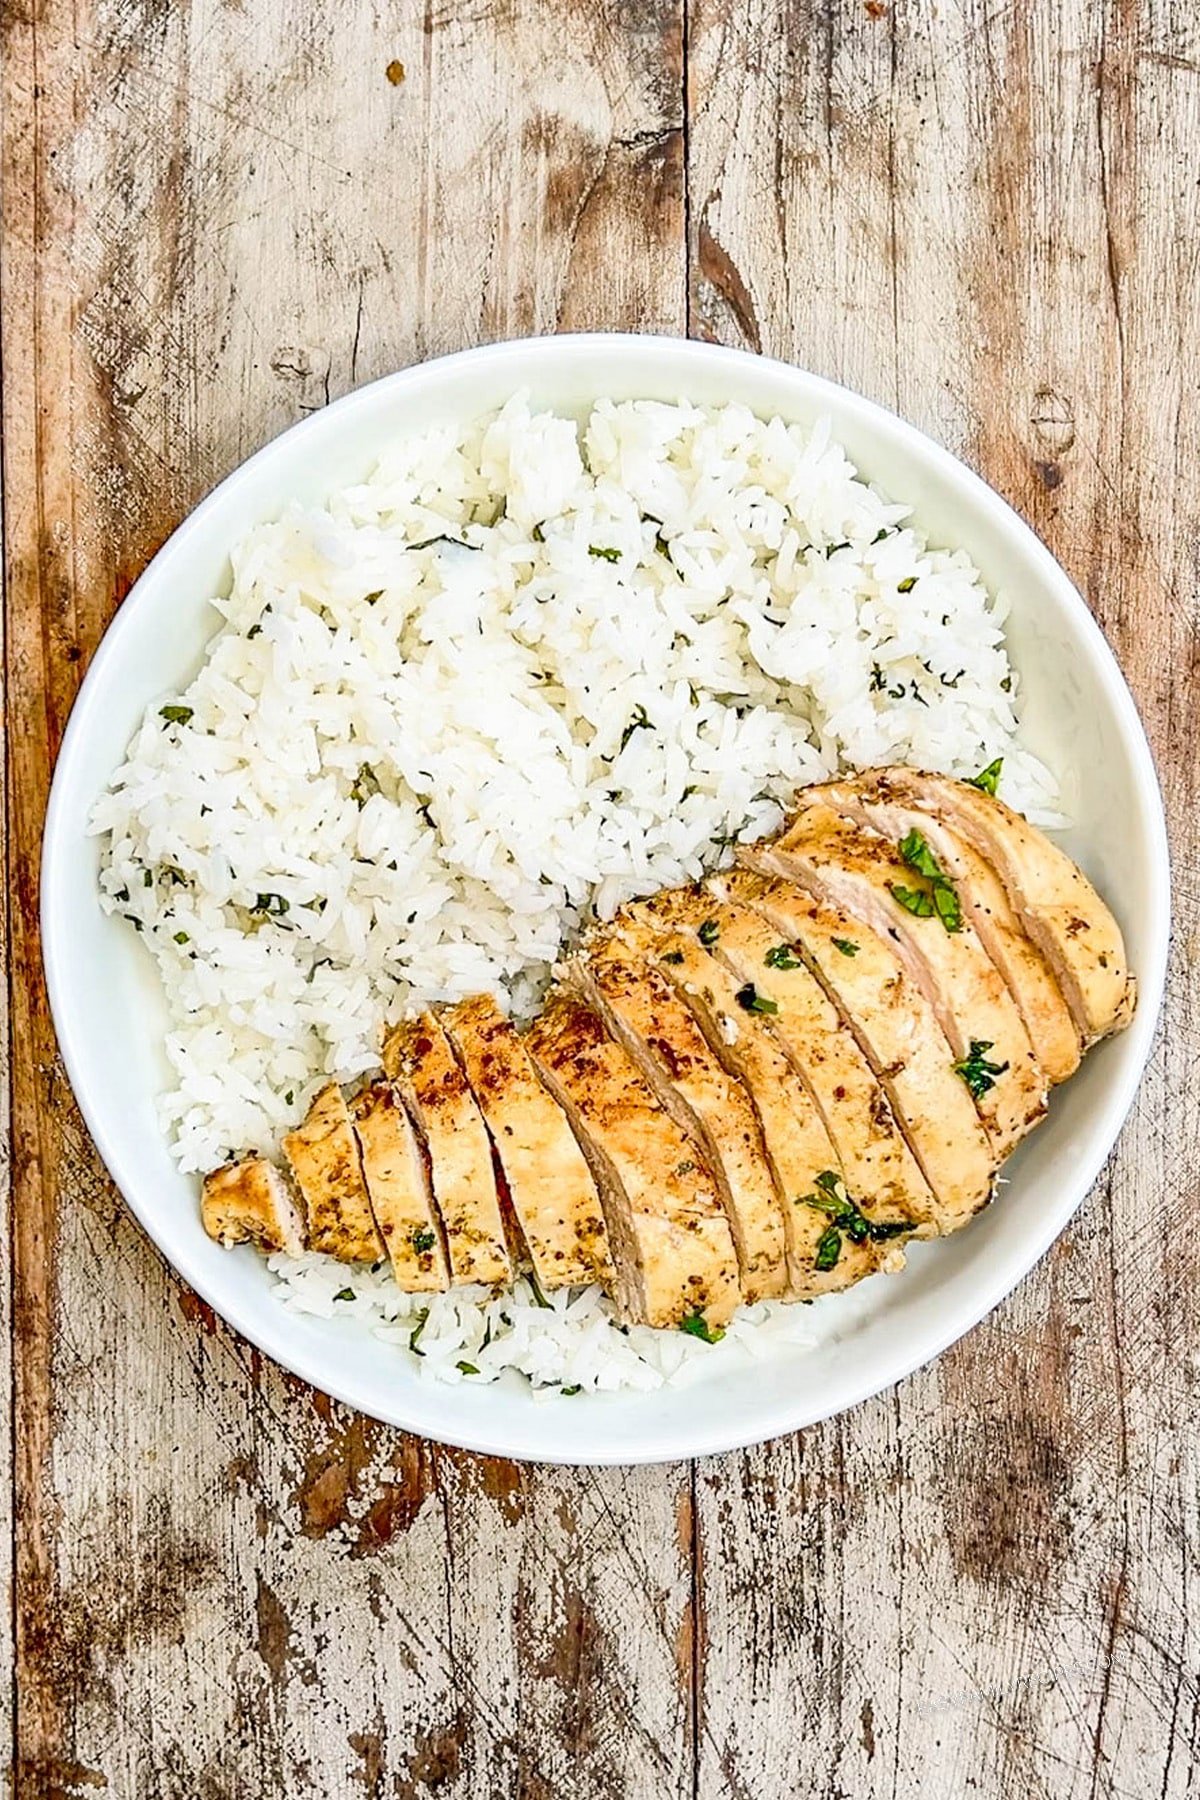 Cilantro lime rice and sliced baja chicken in a white bowl, the base for baja bowls.